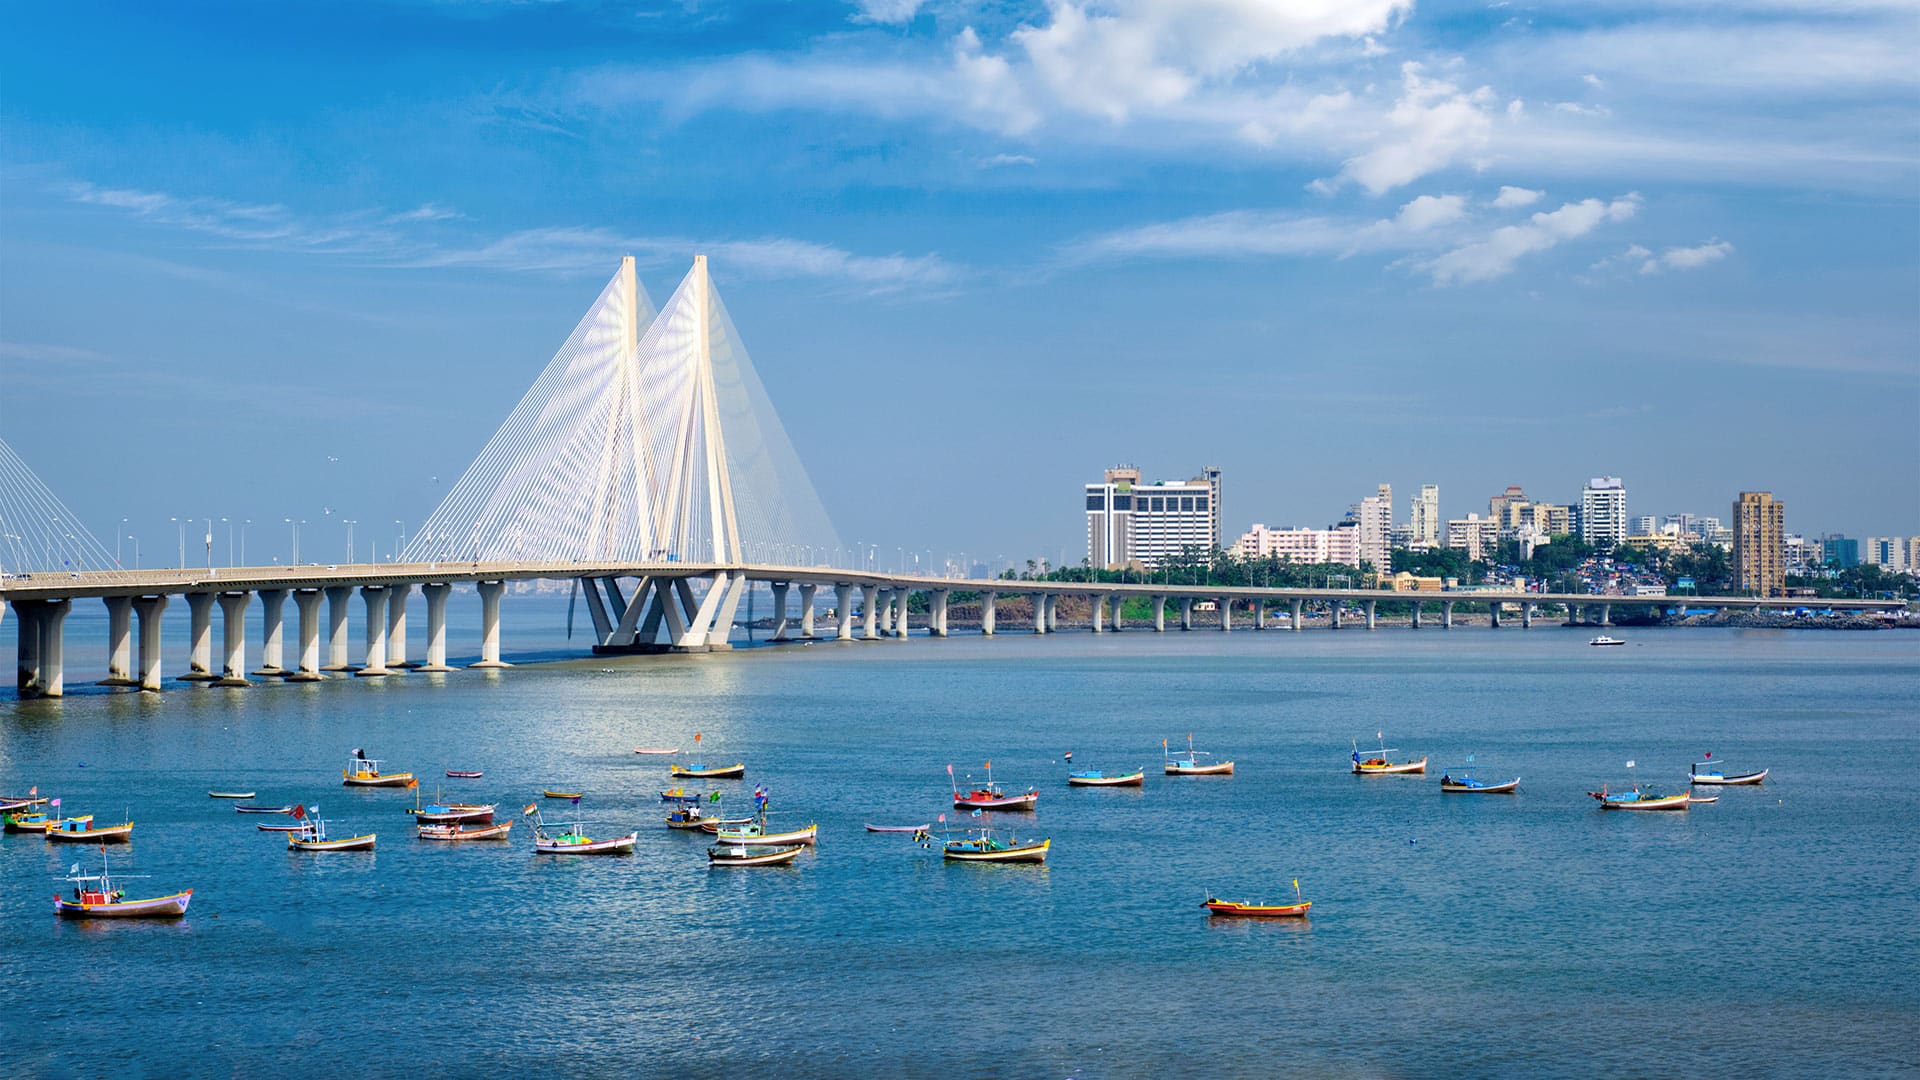 Experience Mumbai, India’s Old-World Charm and Glitzy Modern Side on a Three-Day Visit